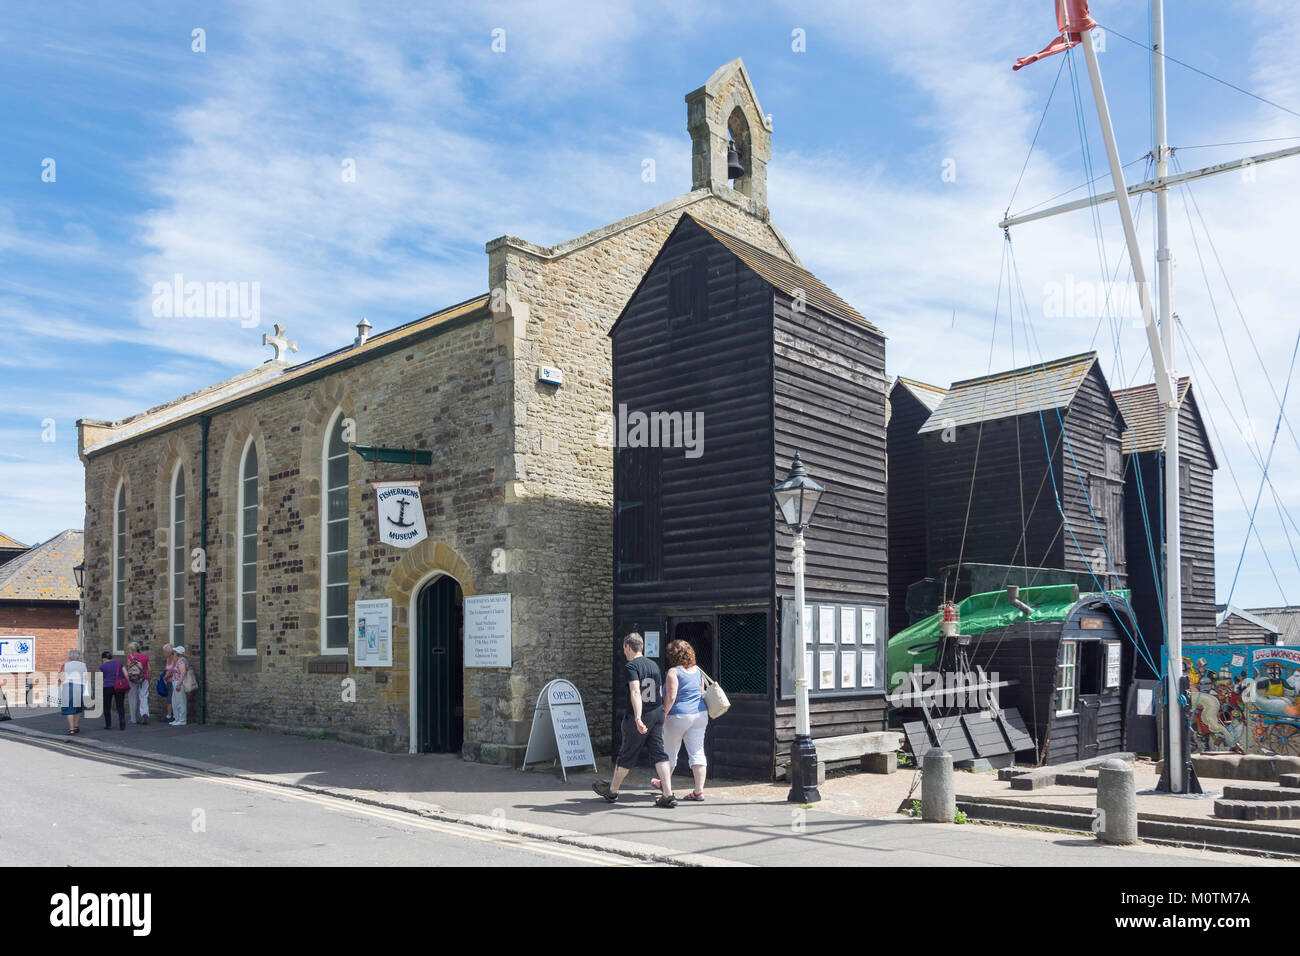 Fisherman's Museum, Rock-A-strada Nore, Hastings, East Sussex, England, Regno Unito Foto Stock